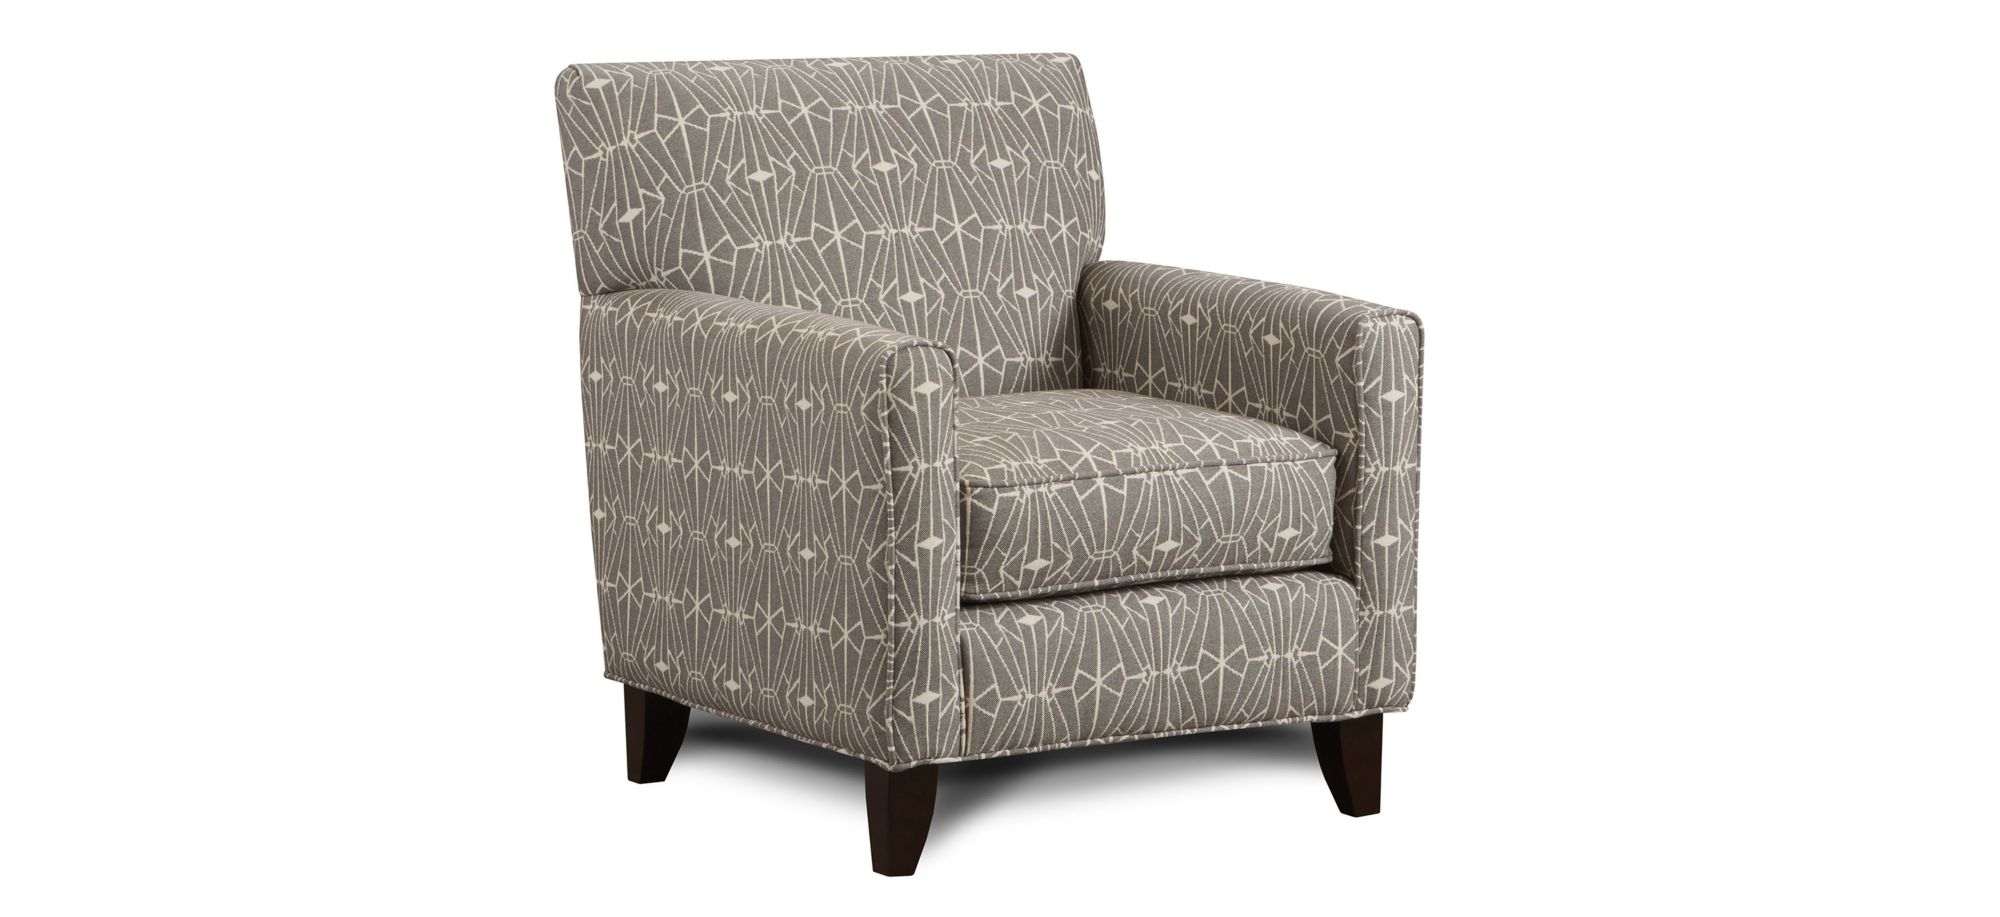 Kristoff Accent Chair in Emblem Charcoal by Fusion Furniture